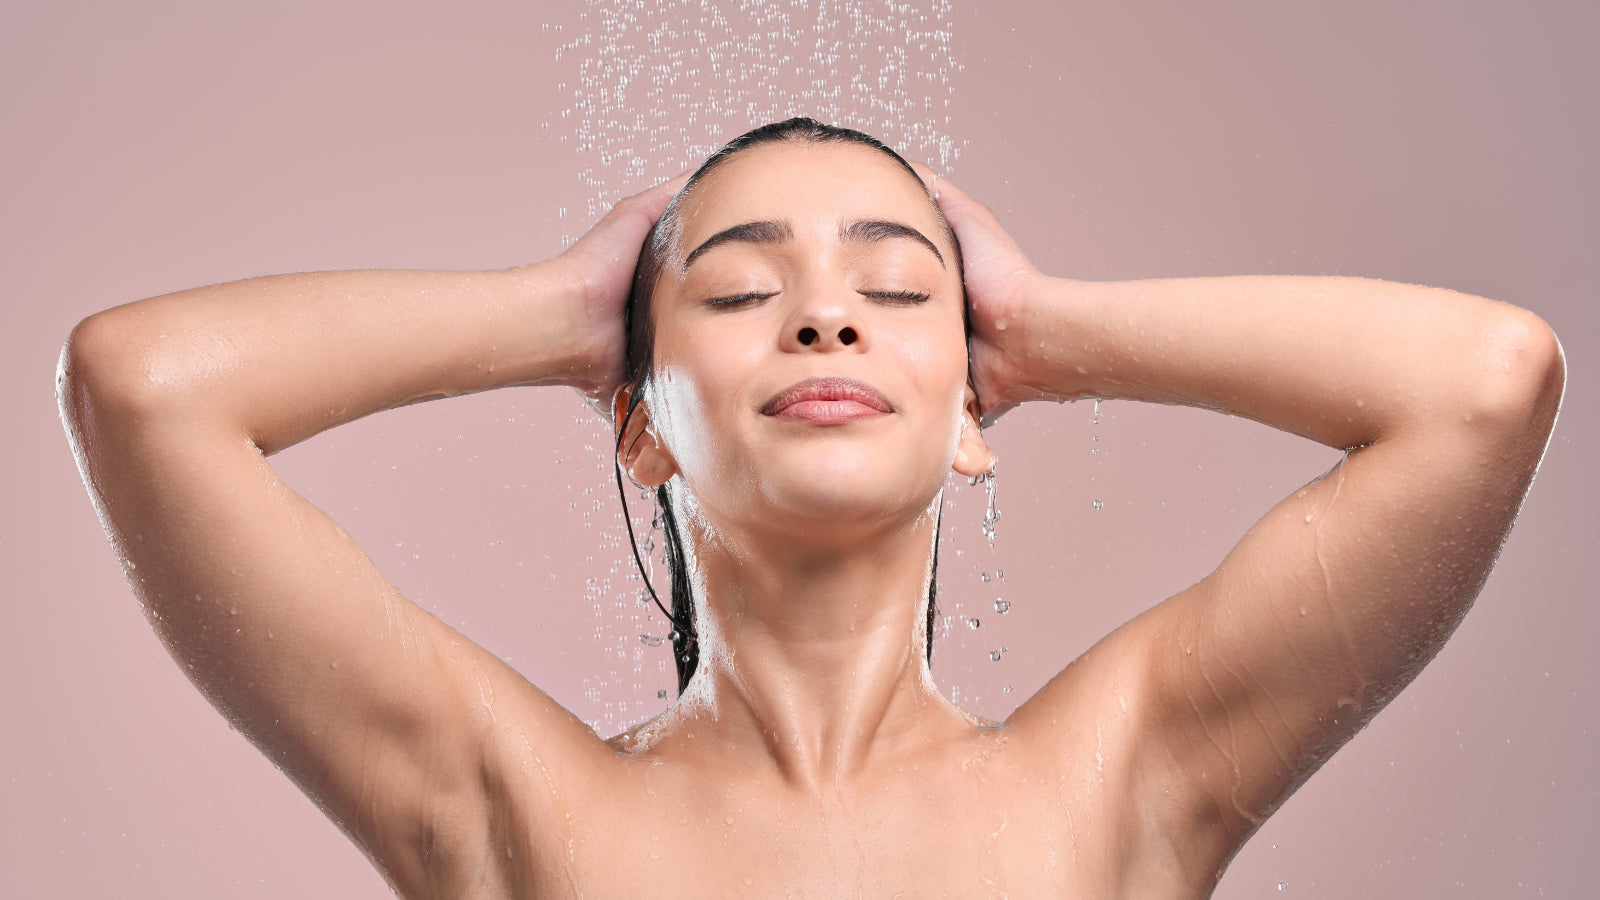 Young woman taking a refreshing shower